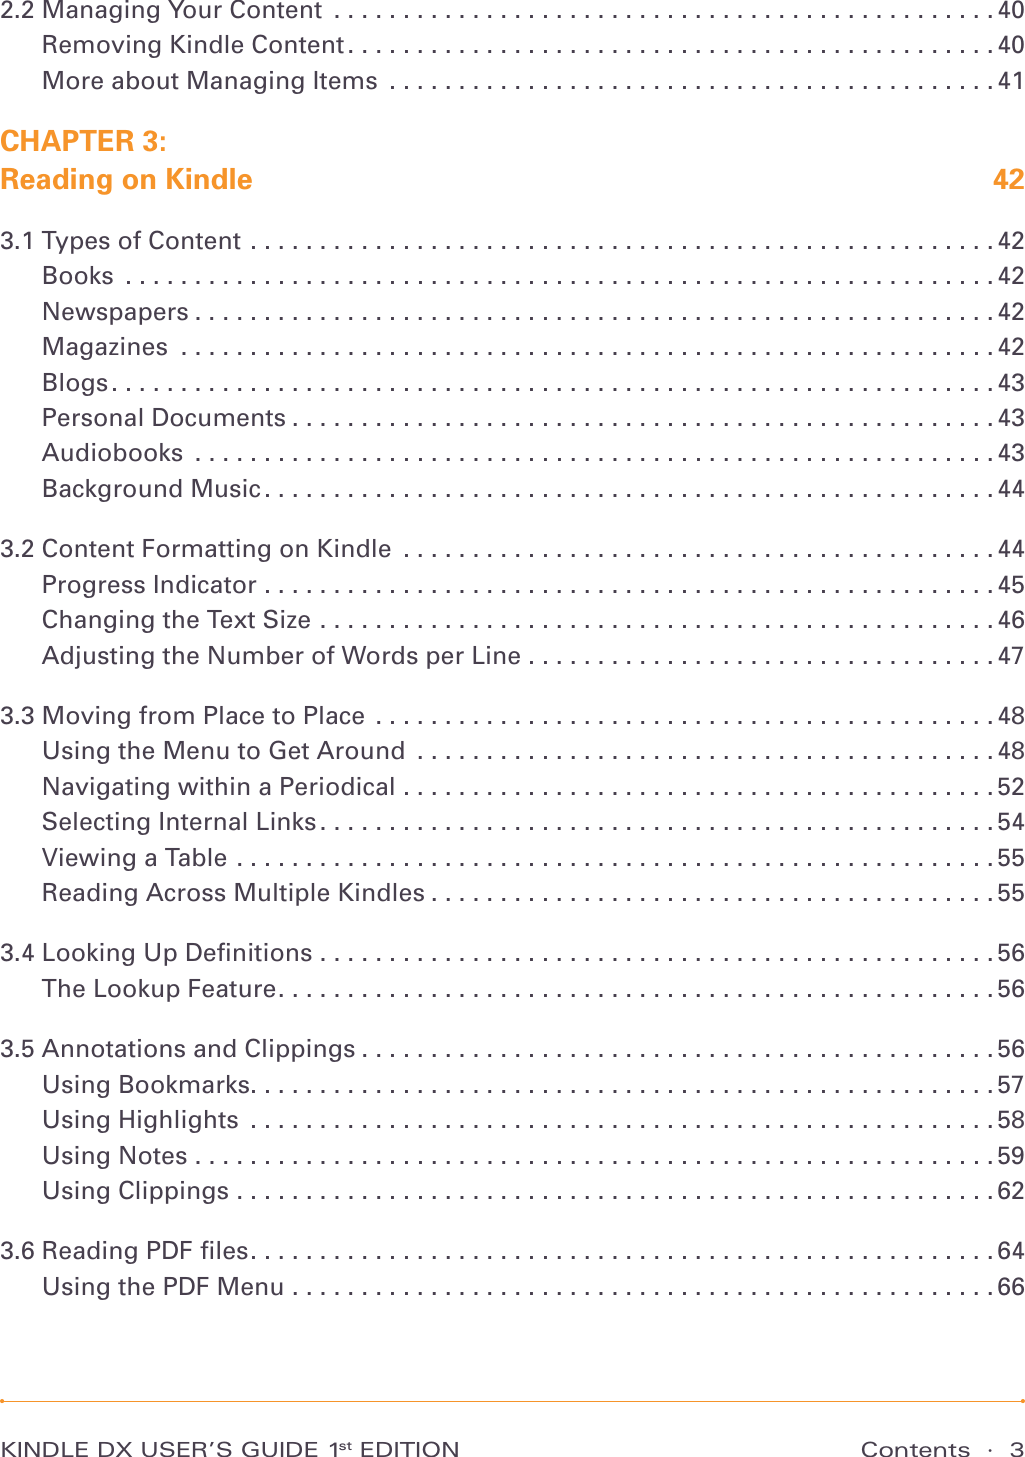 Contents  ·  3KINDLE DX USER’S GUIDE 1st EDITION2.2 Managing Your Content ................................................40Removing Kindle Content ...............................................40More about Managing Items ............................................41CHAPTER 3:  Reading on Kindle  423.1 Types of Content ......................................................42Books ...............................................................42Newspapers ..........................................................42Magazines ...........................................................42Blogs ................................................................43Personal Documents ...................................................43Audiobooks ..........................................................43Background Music .....................................................443.2 Content Formatting on Kindle ...........................................44Progress Indicator .....................................................45Changing the Text Size .................................................46Adjusting the Number of Words per Line . . . . . . . . . . . . . . . . . . . . . . . . . . . . . . . . . . 473.3 Moving from Place to Place .............................................48Using the Menu to Get Around ..........................................48Navigating within a Periodical ...........................................52Selecting Internal Links .................................................54Viewing a Table .......................................................55Reading Across Multiple Kindles .........................................553.4 Looking Up Deﬁnitions .................................................56The Lookup Feature ....................................................563.5 Annotations and Clippings ..............................................56Using Bookmarks ......................................................57Using Highlights  ......................................................58Using Notes ..........................................................59Using Clippings .......................................................623.6 Reading PDF ﬁles ......................................................64Using the PDF Menu ...................................................66